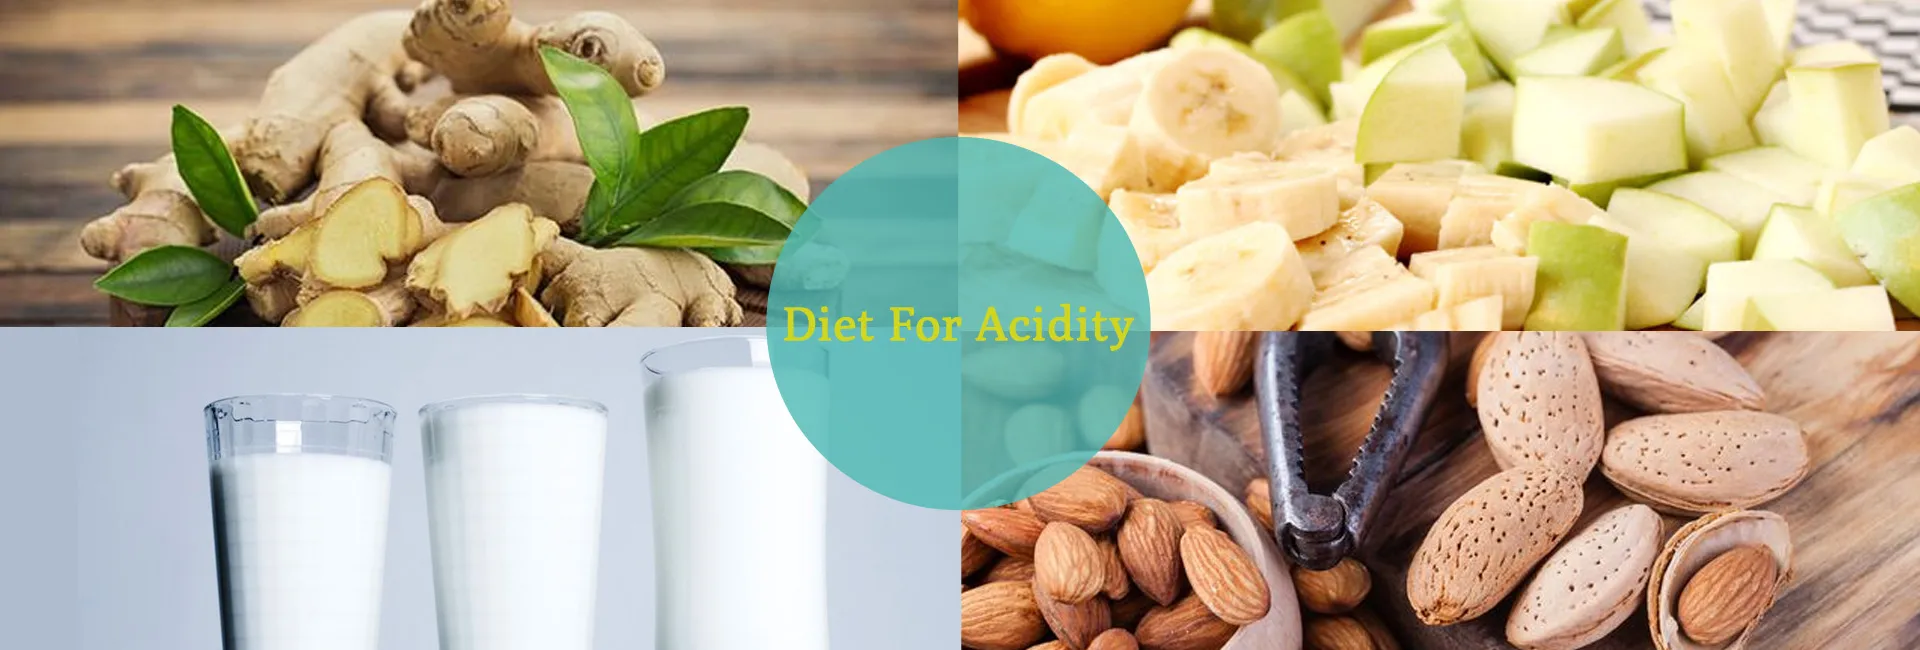 Diet For Acidity In Sharjah